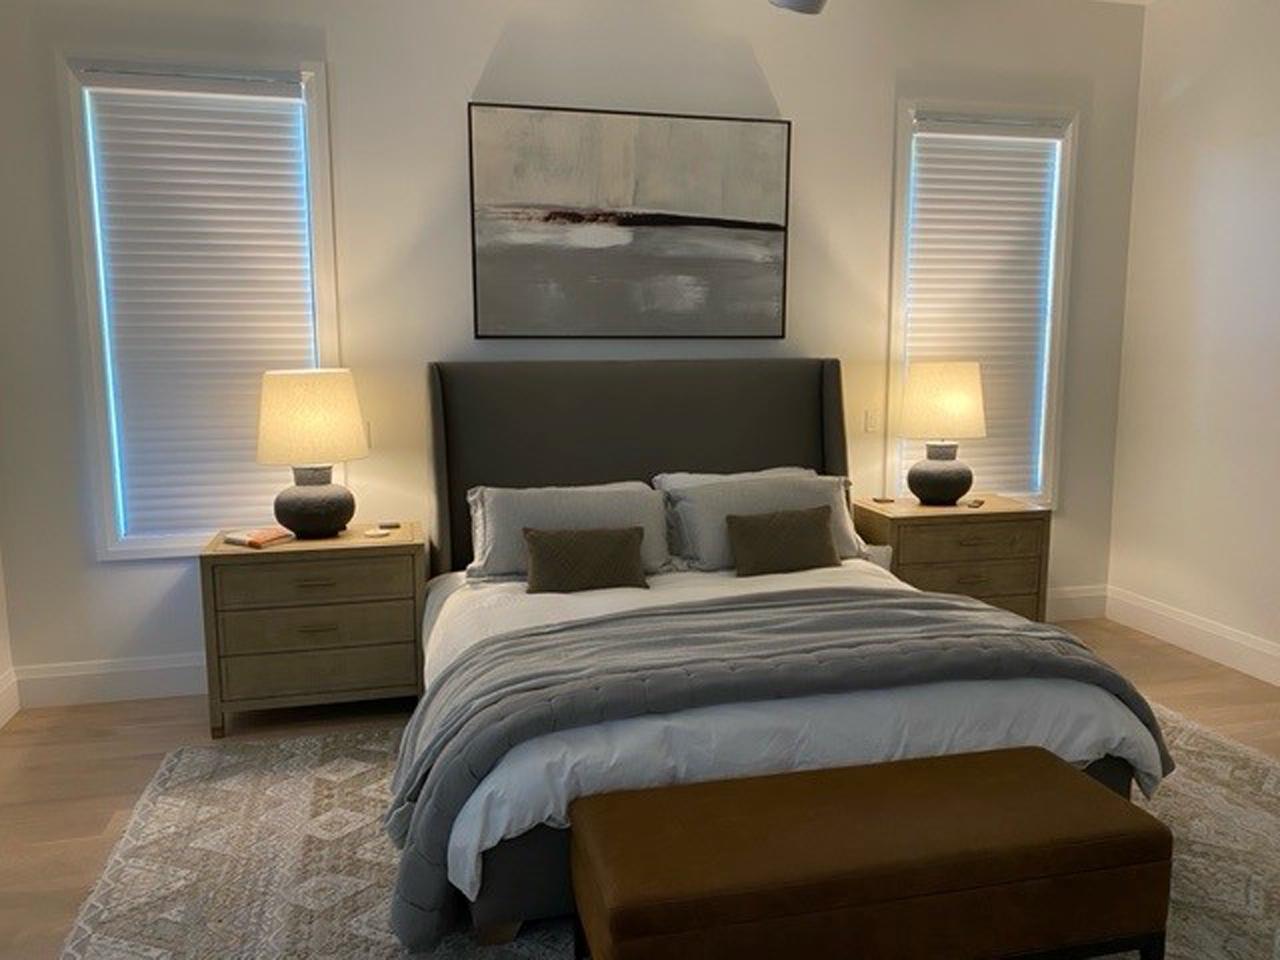 Faux wood blinds in a bedroom